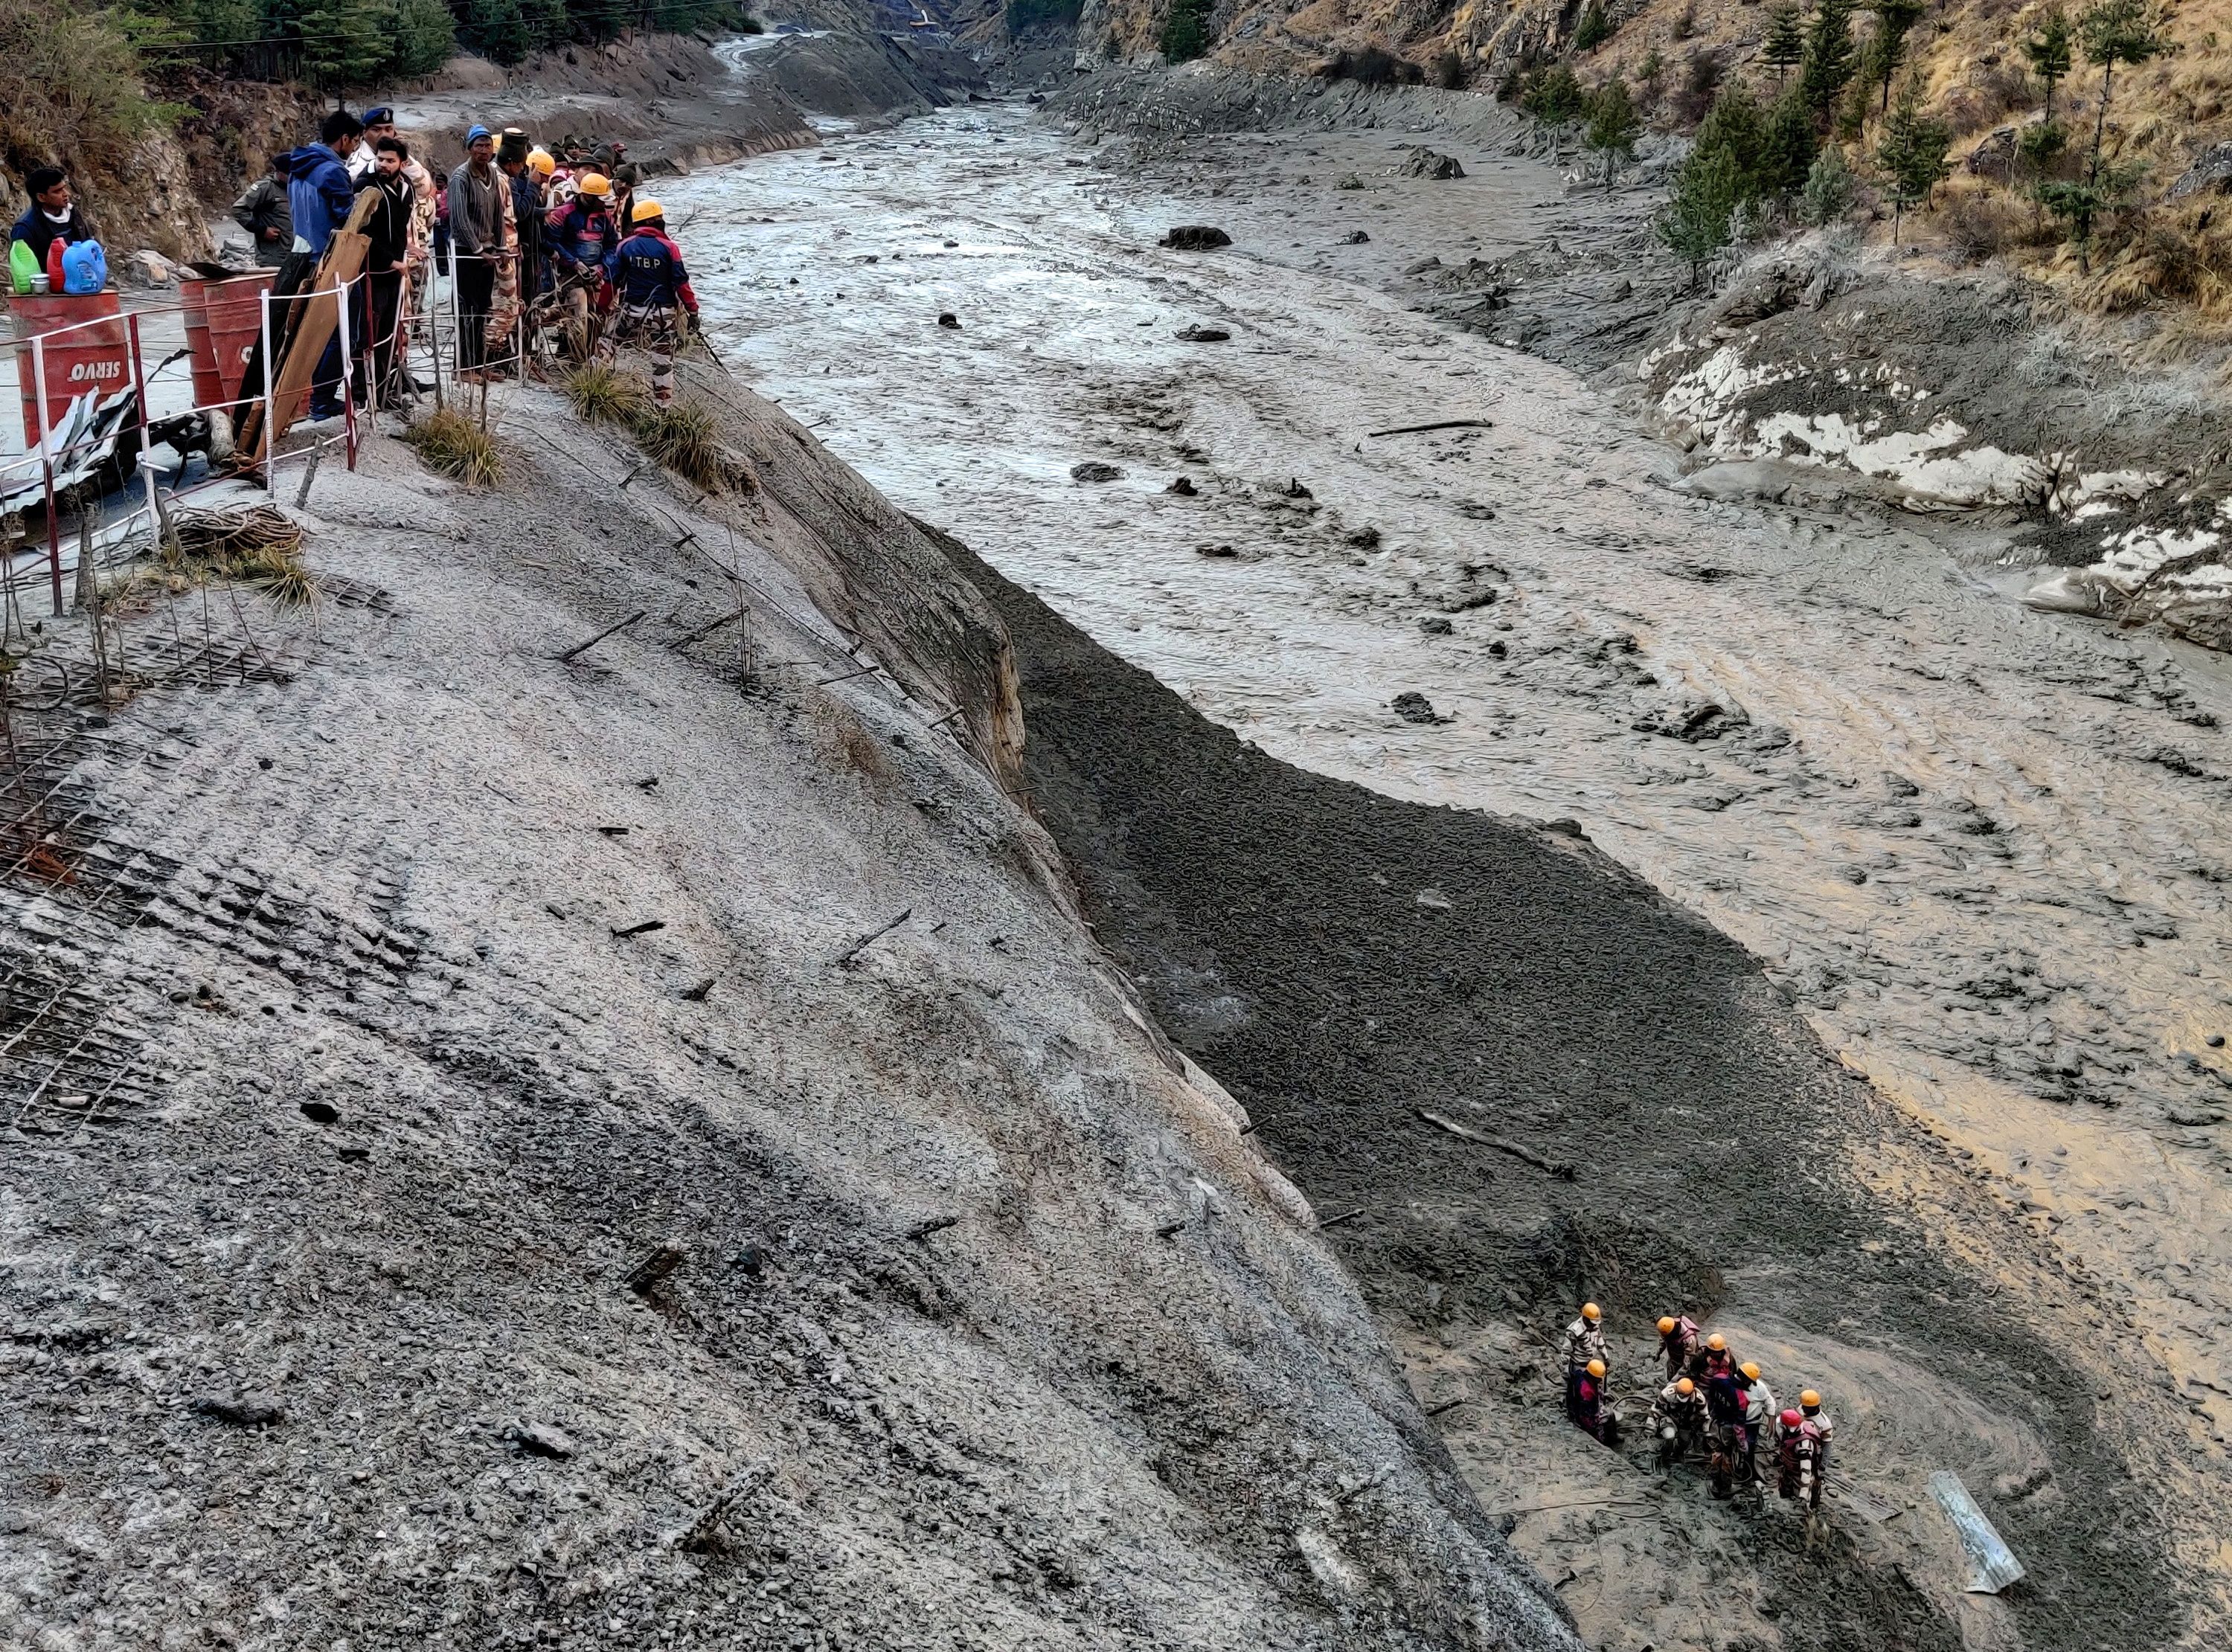 Members of Indo-Tibetan Border Police search for survivors after a Himalayan glacier broke and swept away a small hydroelectric dam, in Chormi